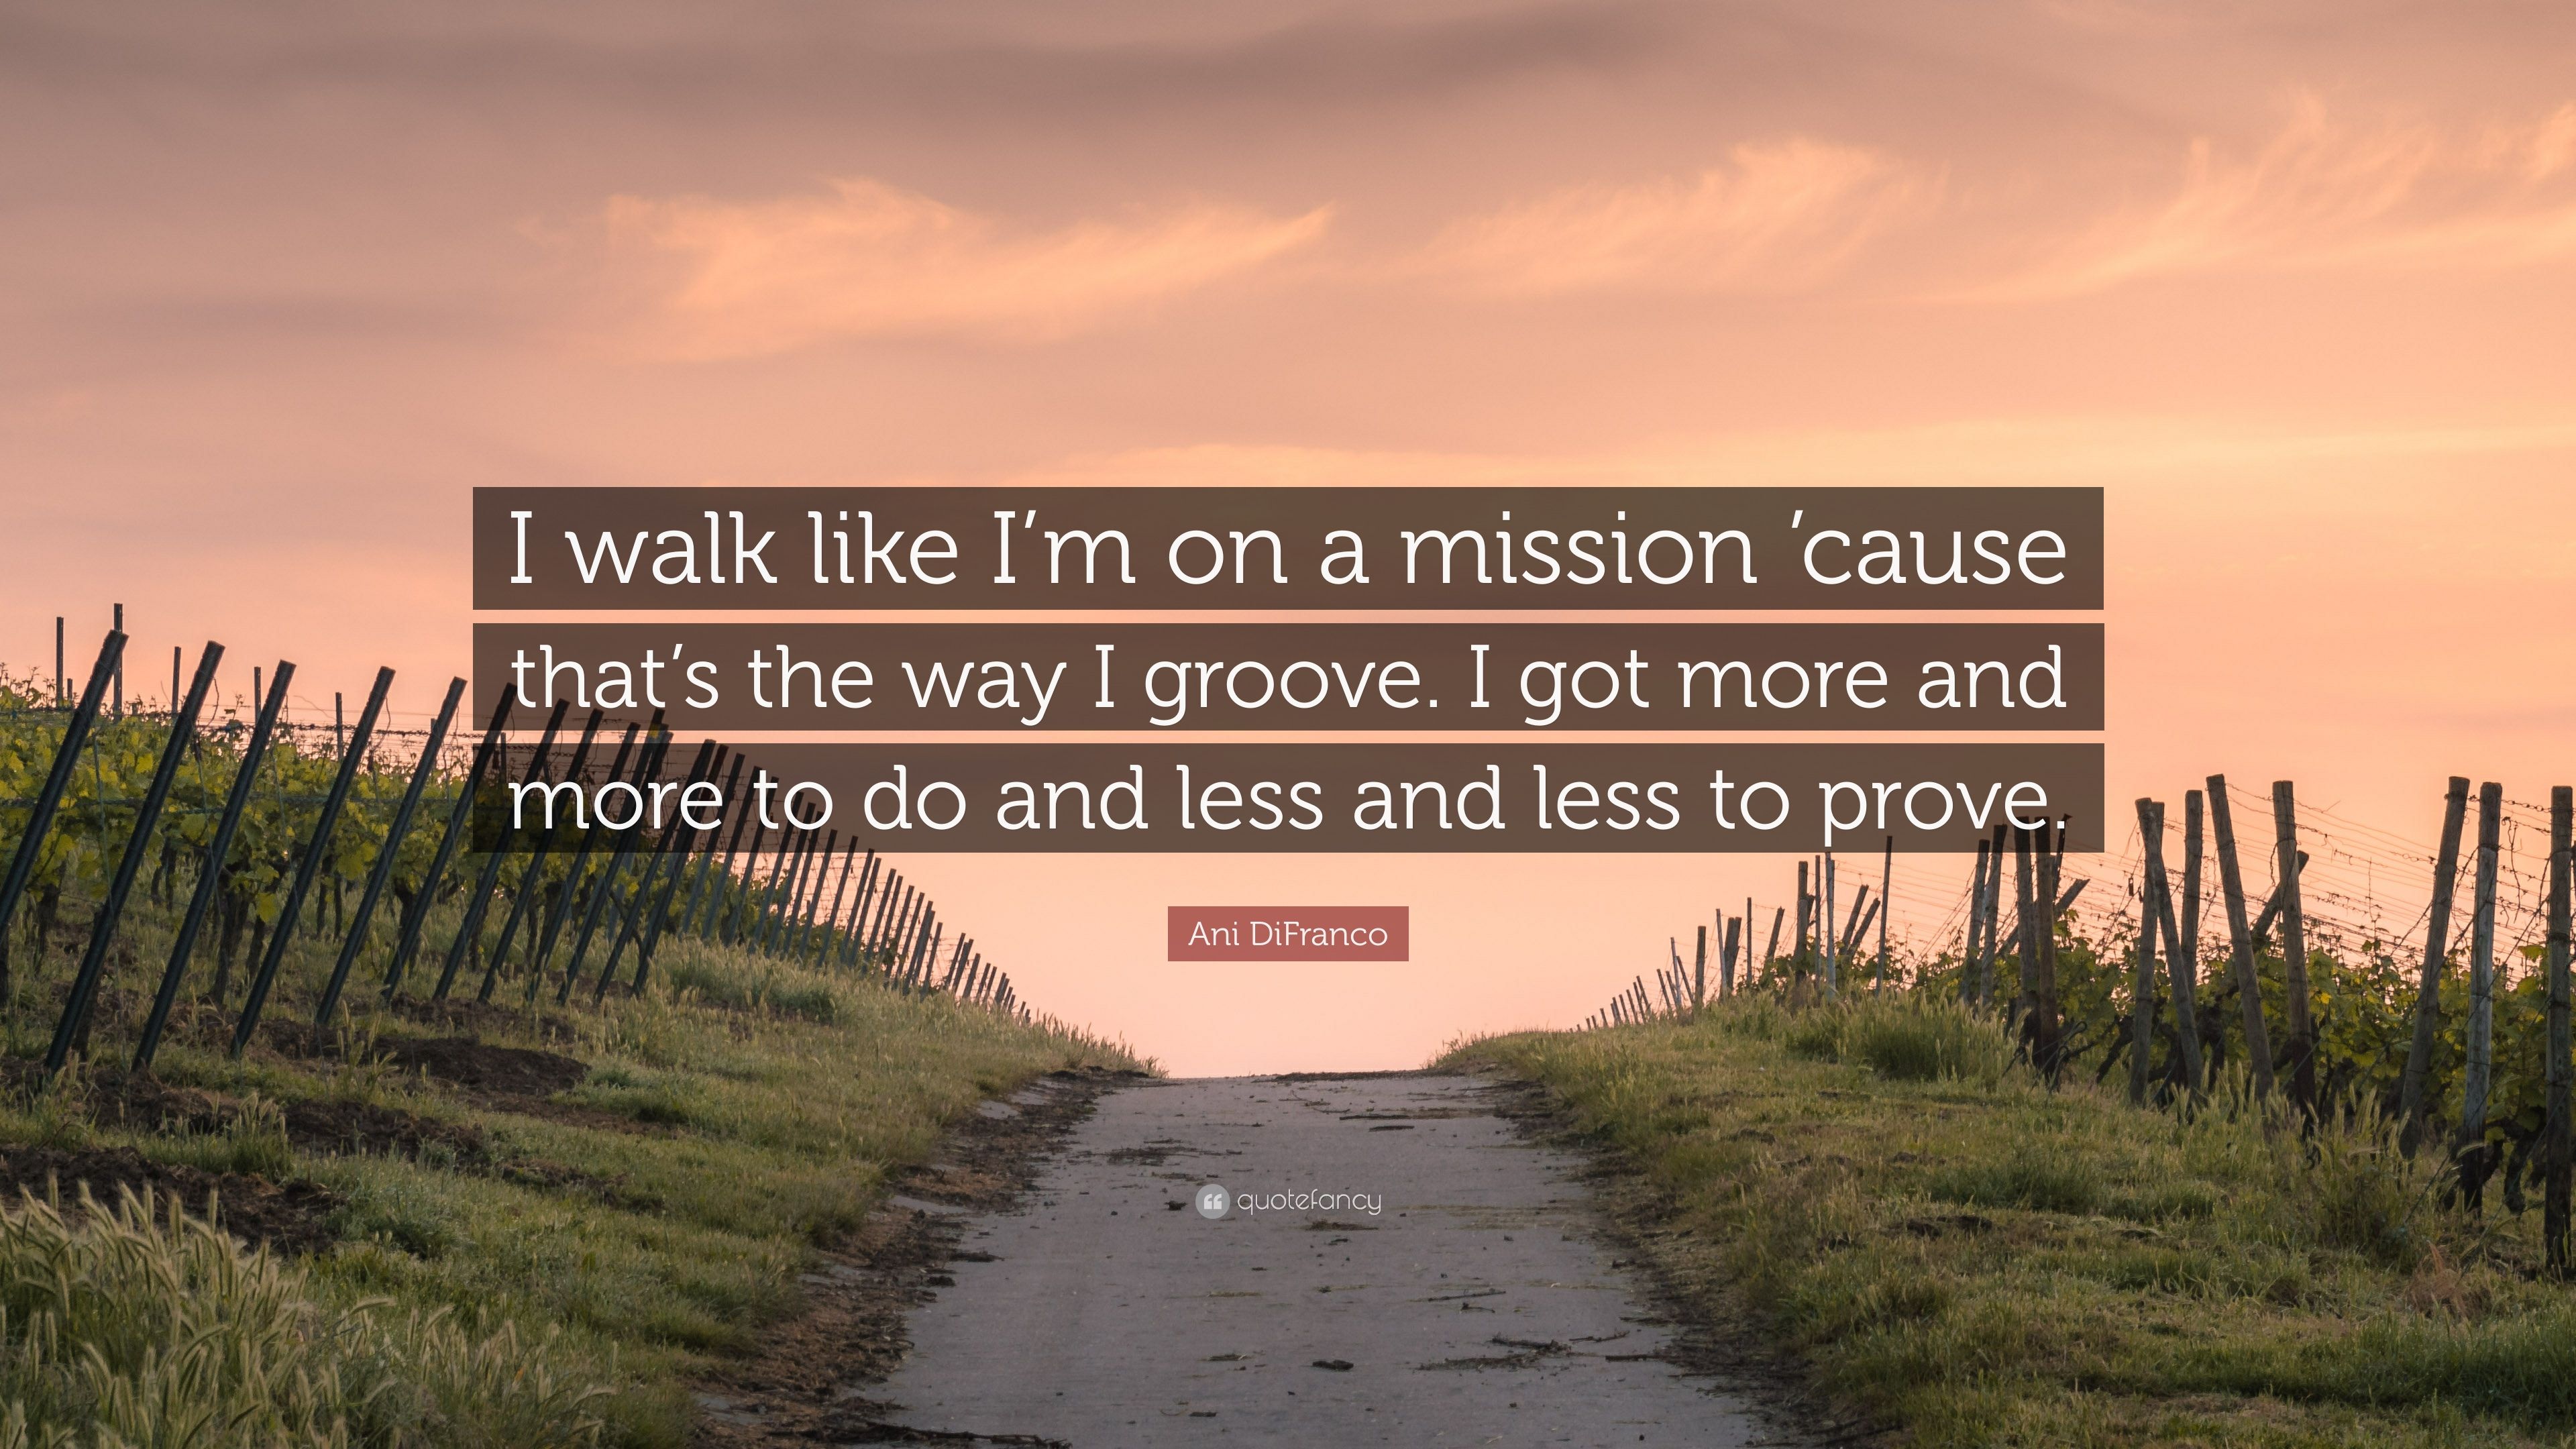 Ani DiFranco Quote: “I walk like I'm on a mission 'cause that's the ...